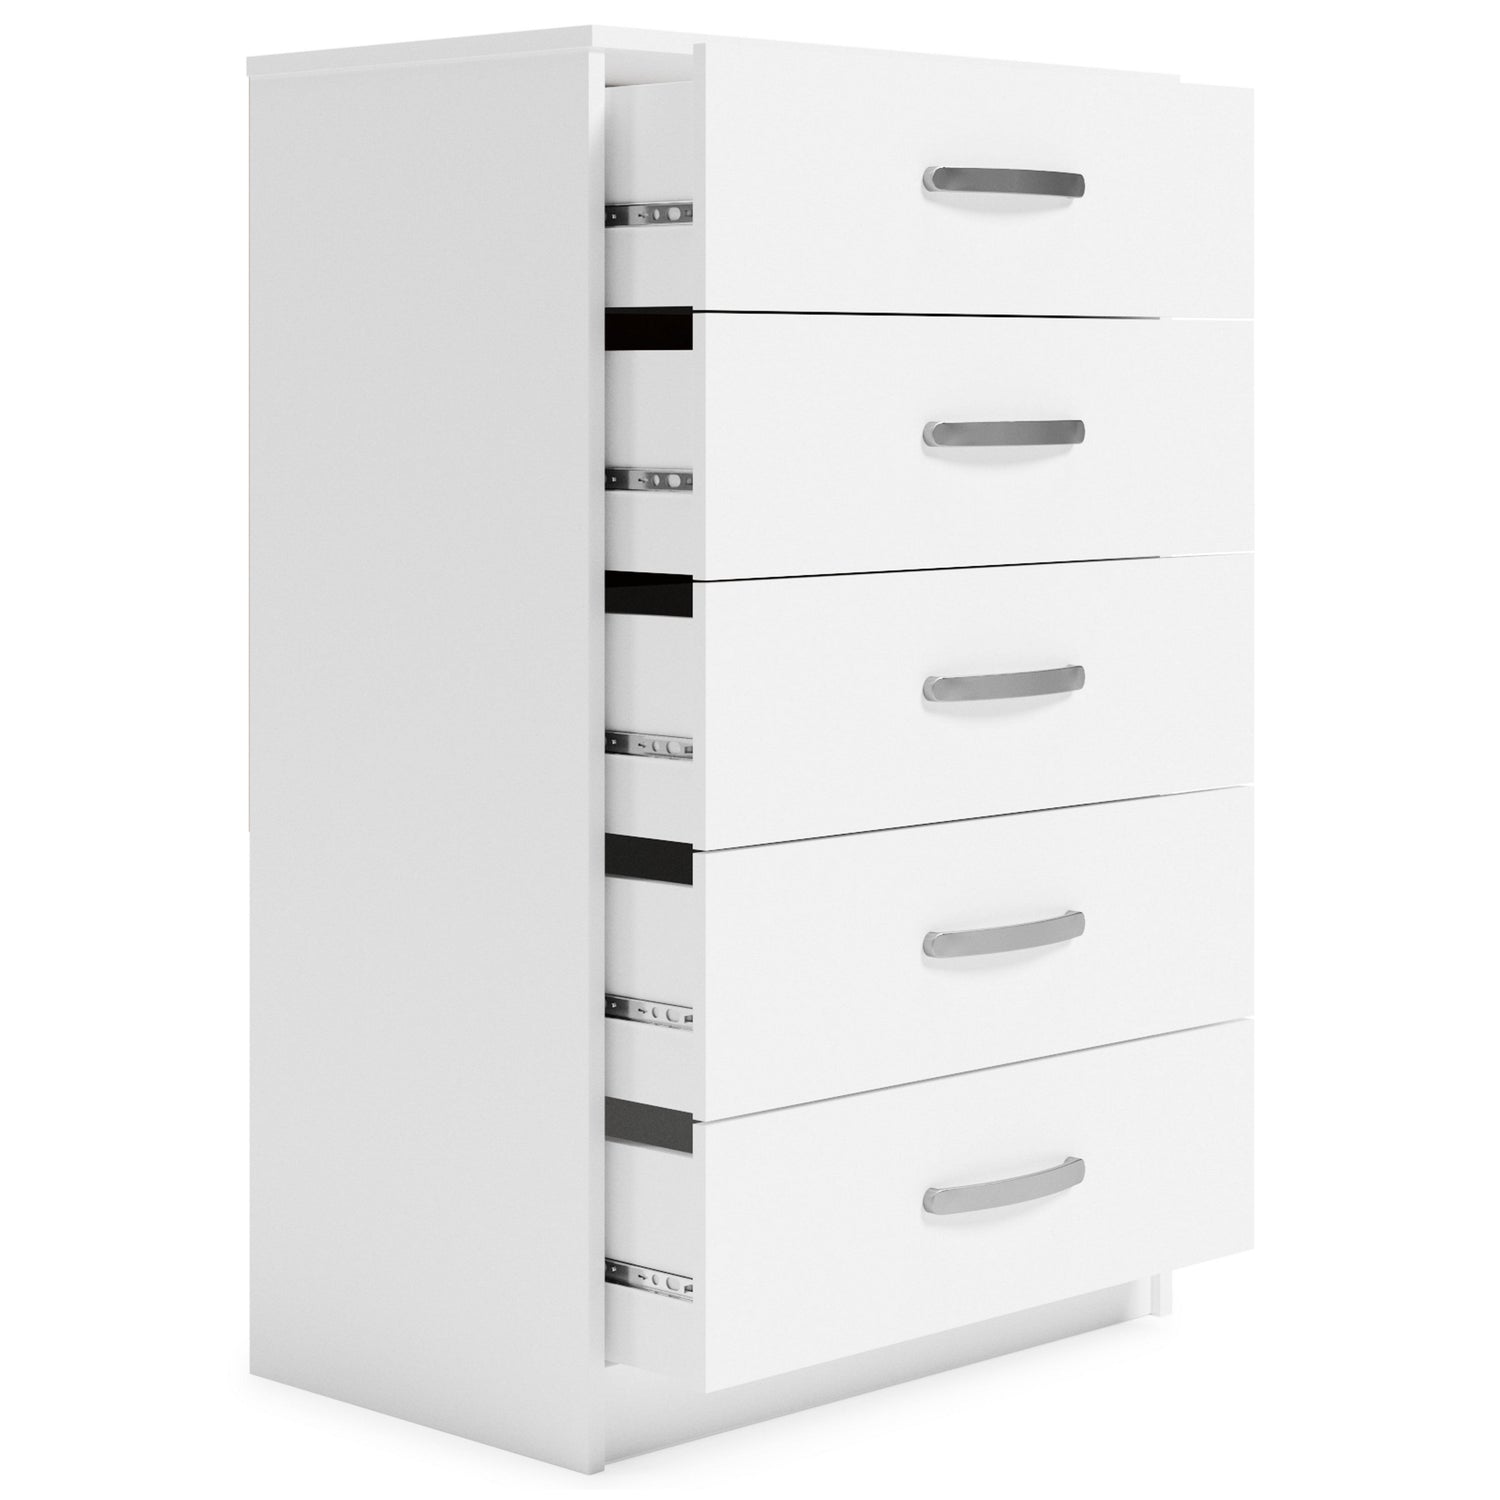 Flannia Chest of Drawers Ash-EB3477-145